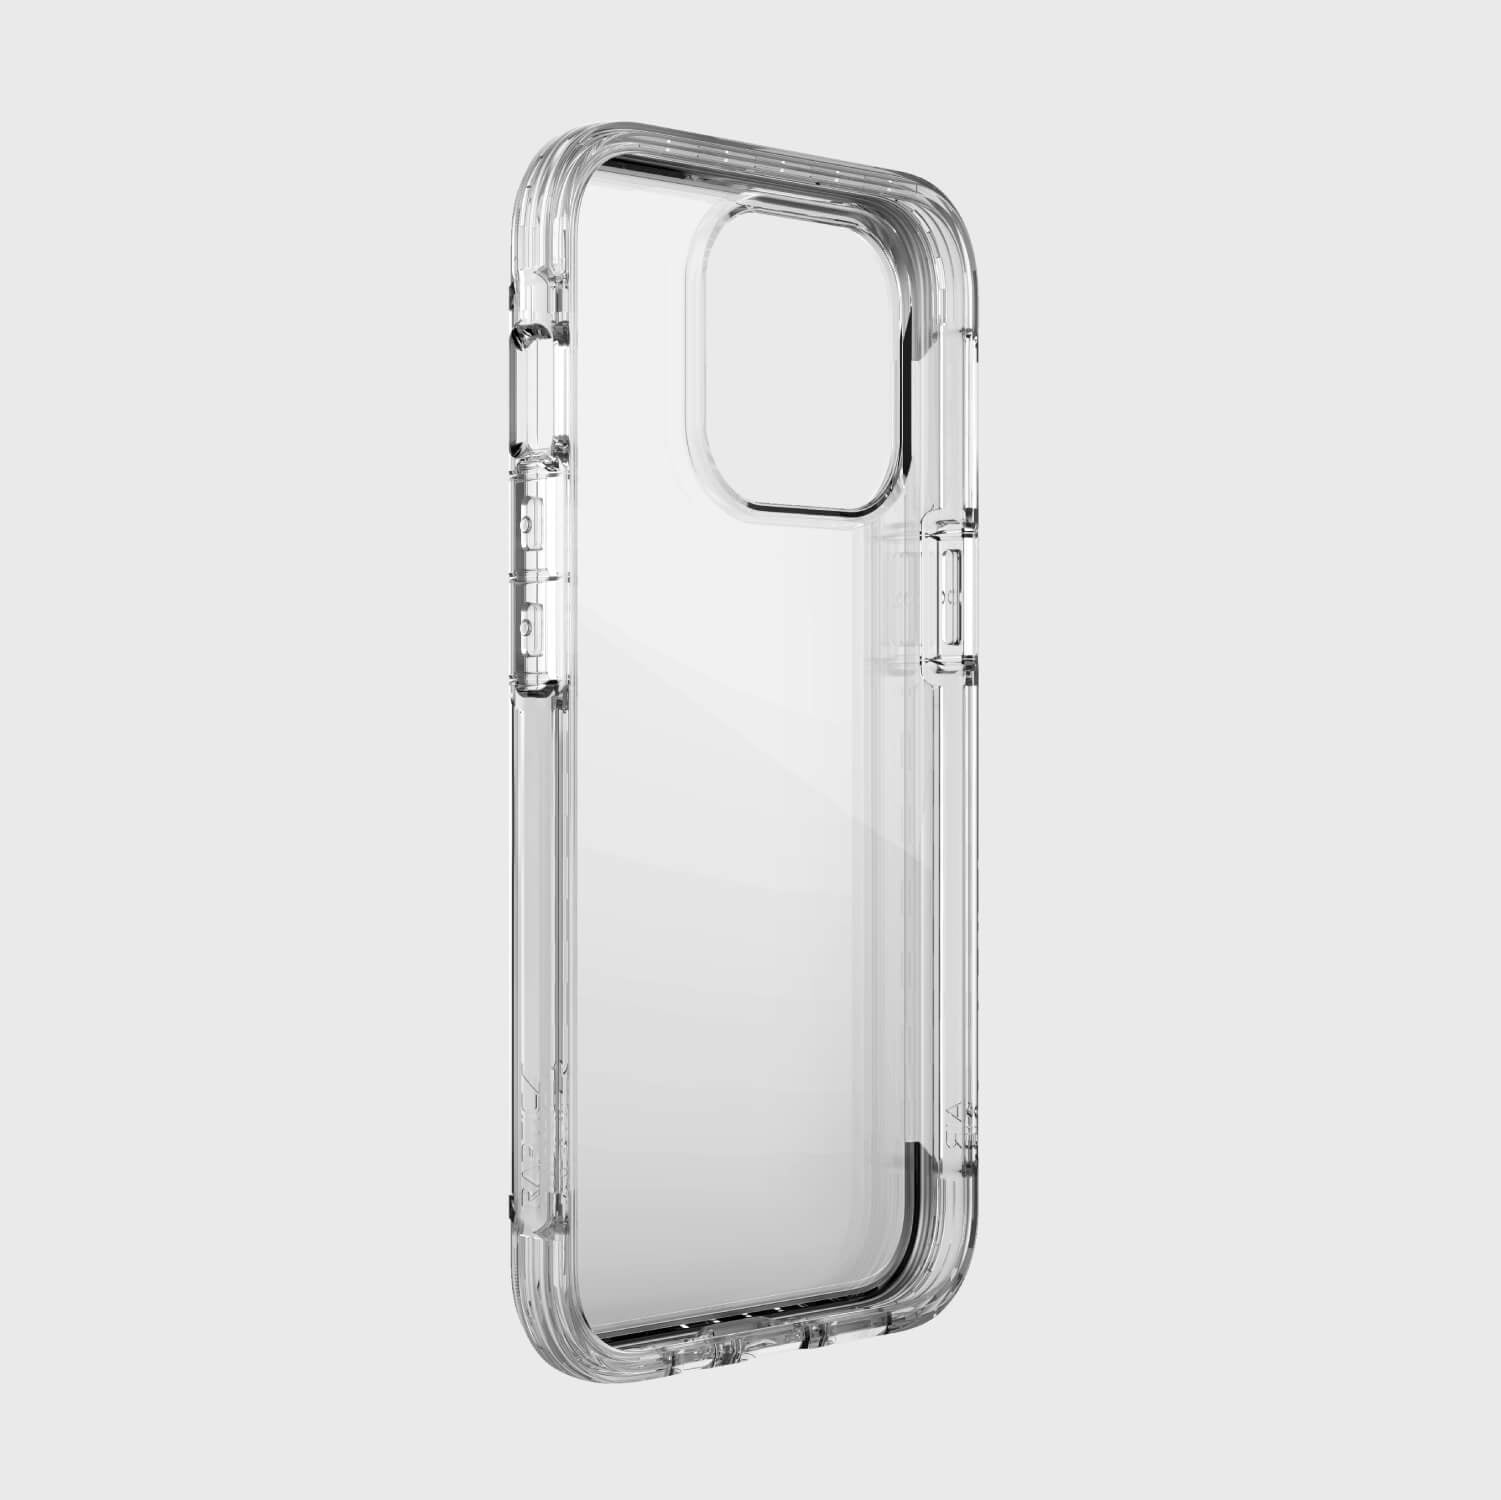 A Raptic iPhone 13 Pro Max Case - AIR with a clear back, featuring 13-foot drop protection.